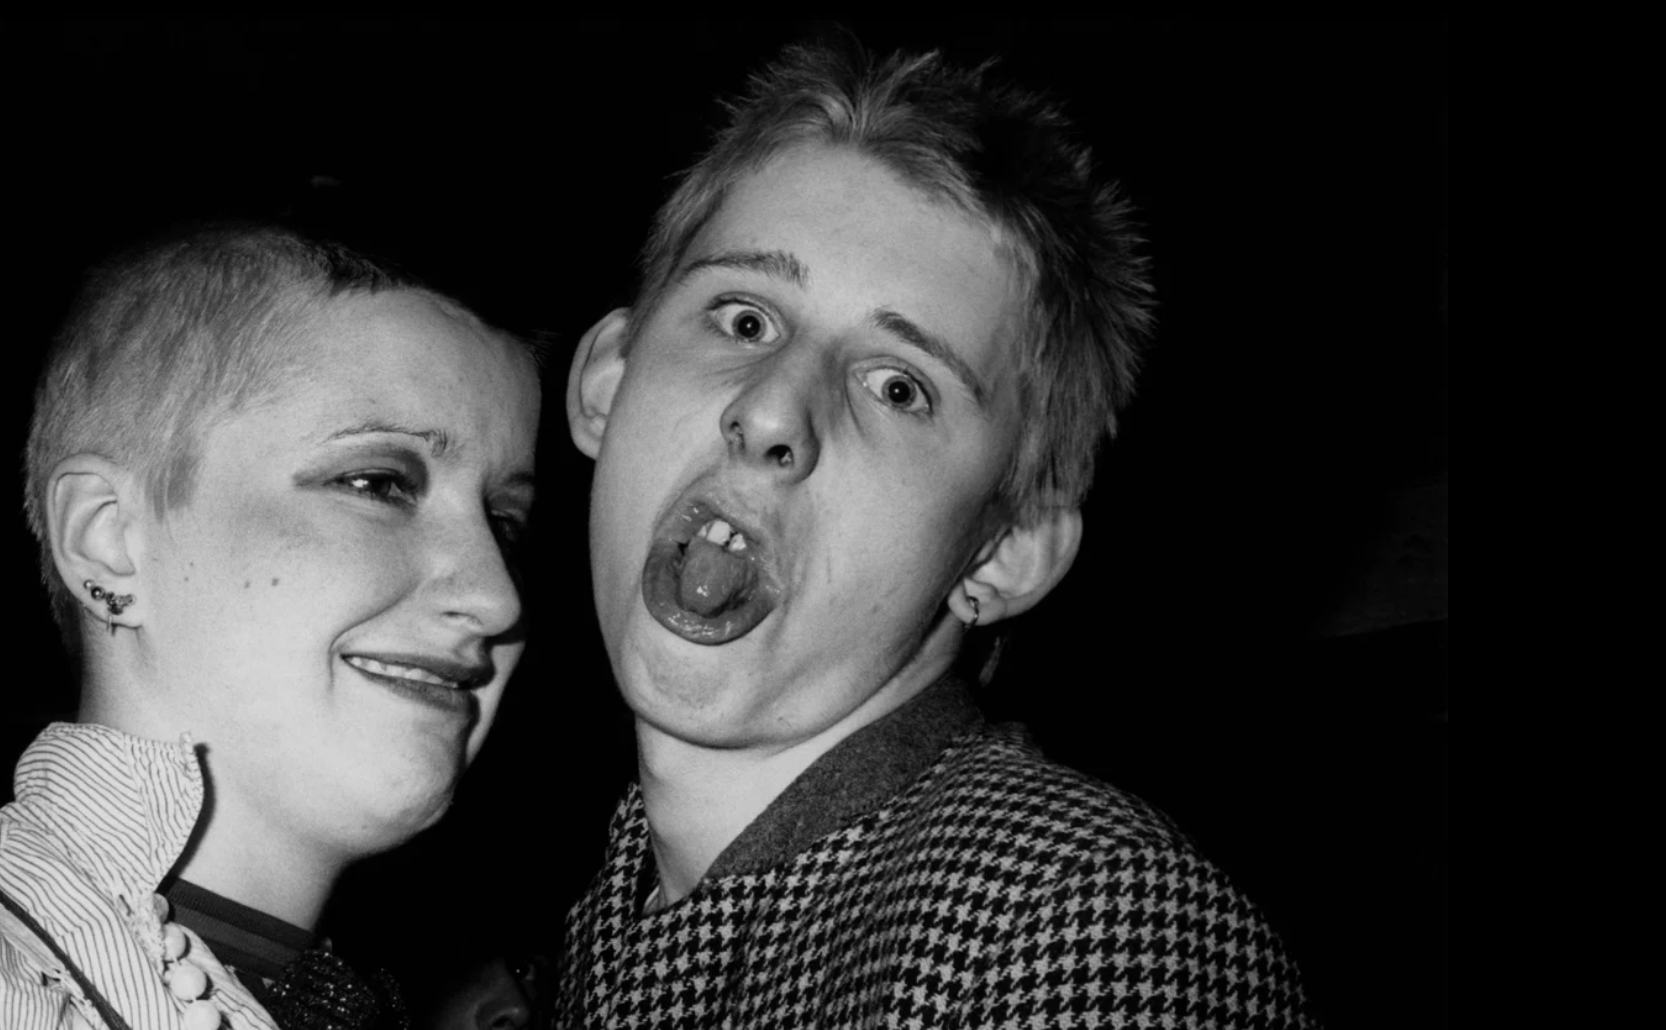 From 2001: ‘When I’m actually dead, you’ll have to convince me otherwise’ – Shane MacGowan